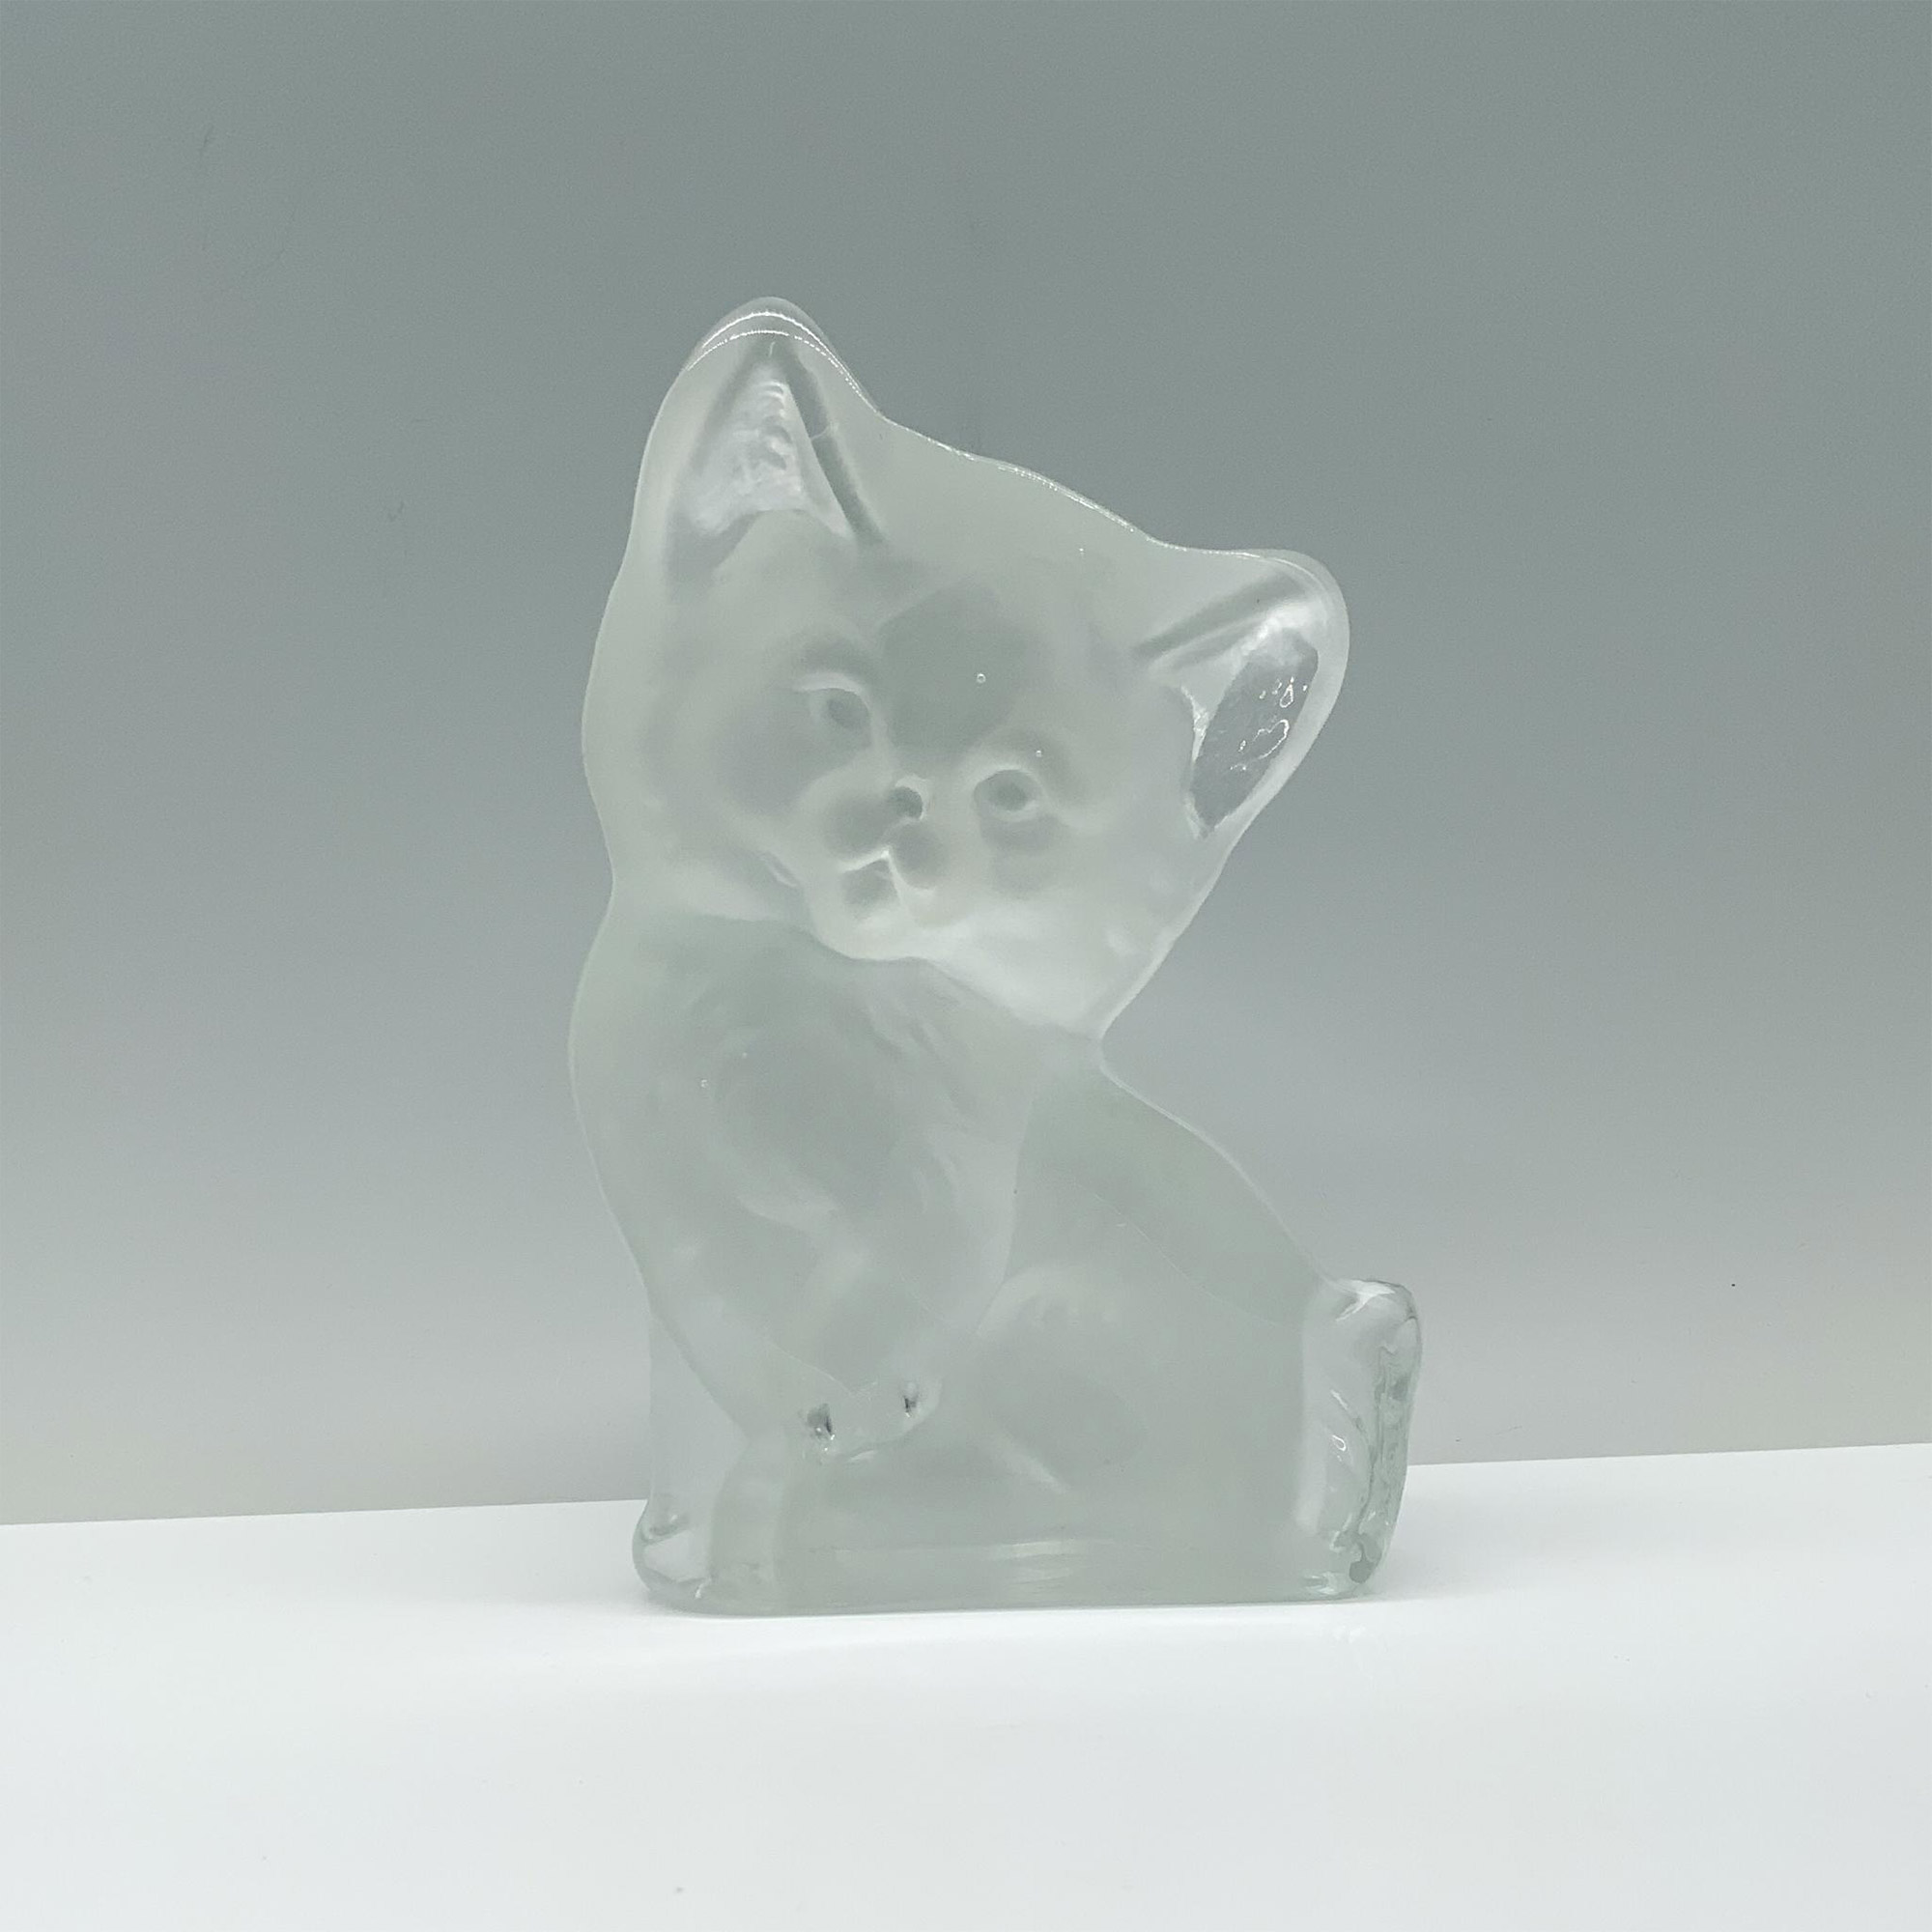 Frosted Glass Kitten Figurine - Image 2 of 3